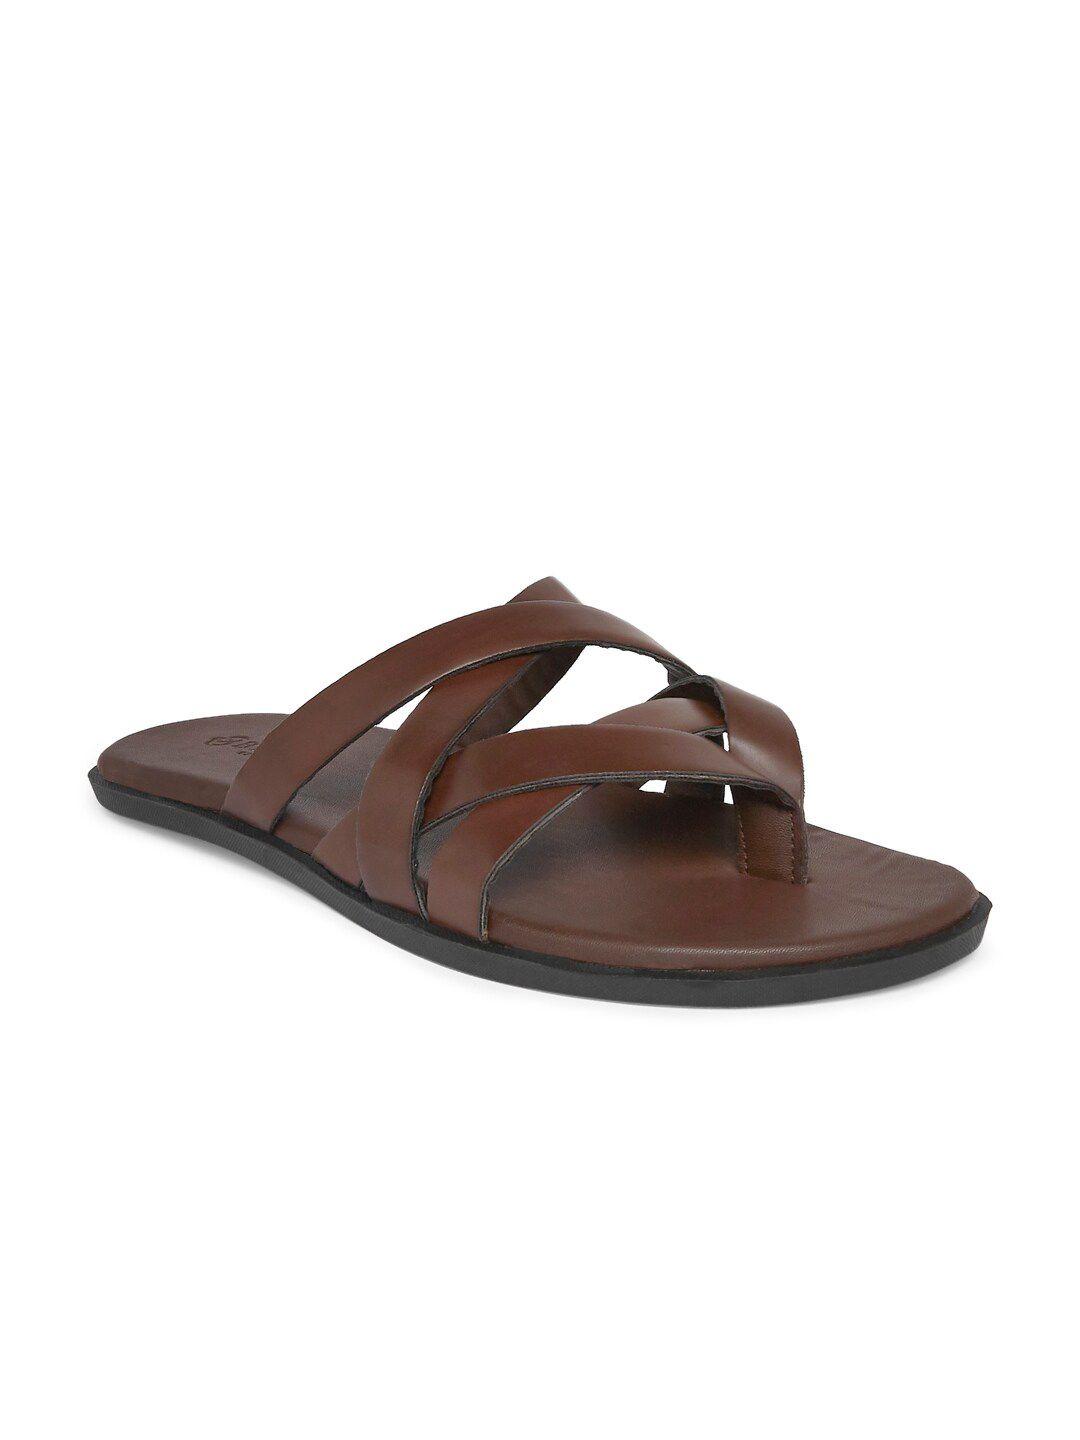 byford by pantaloons men brown comfort sandals